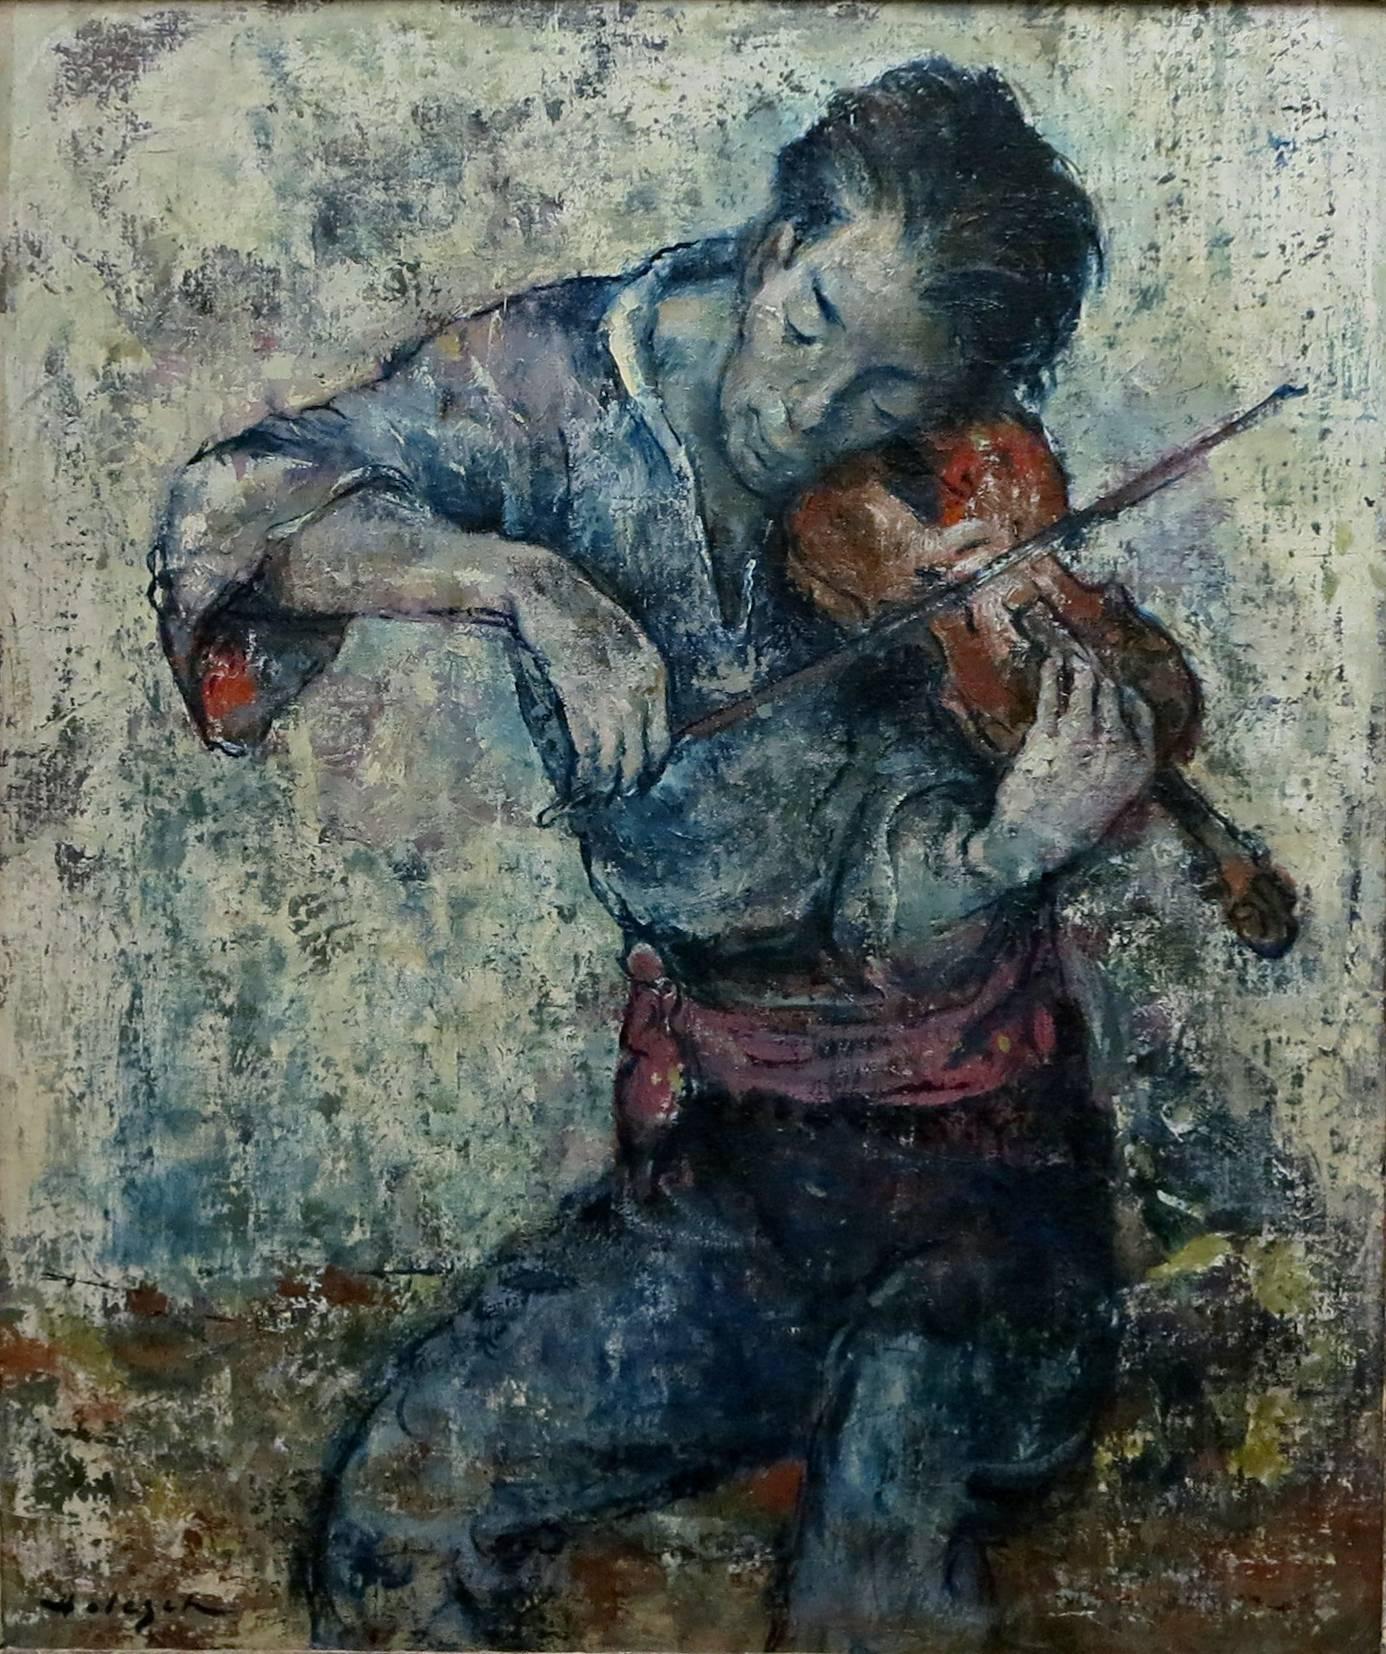 Denes Holesch,
Hungarian, 1910-1983.
The Violinist.

Measures: Oil on board.
26 ½ by 22 in. with frame 33 by 28 ½ in.

Denes Holesch (Denes de Holesch) was born in 1910 in Besztercebanya, Hungary. He entered the Academy of Fine Arts as a